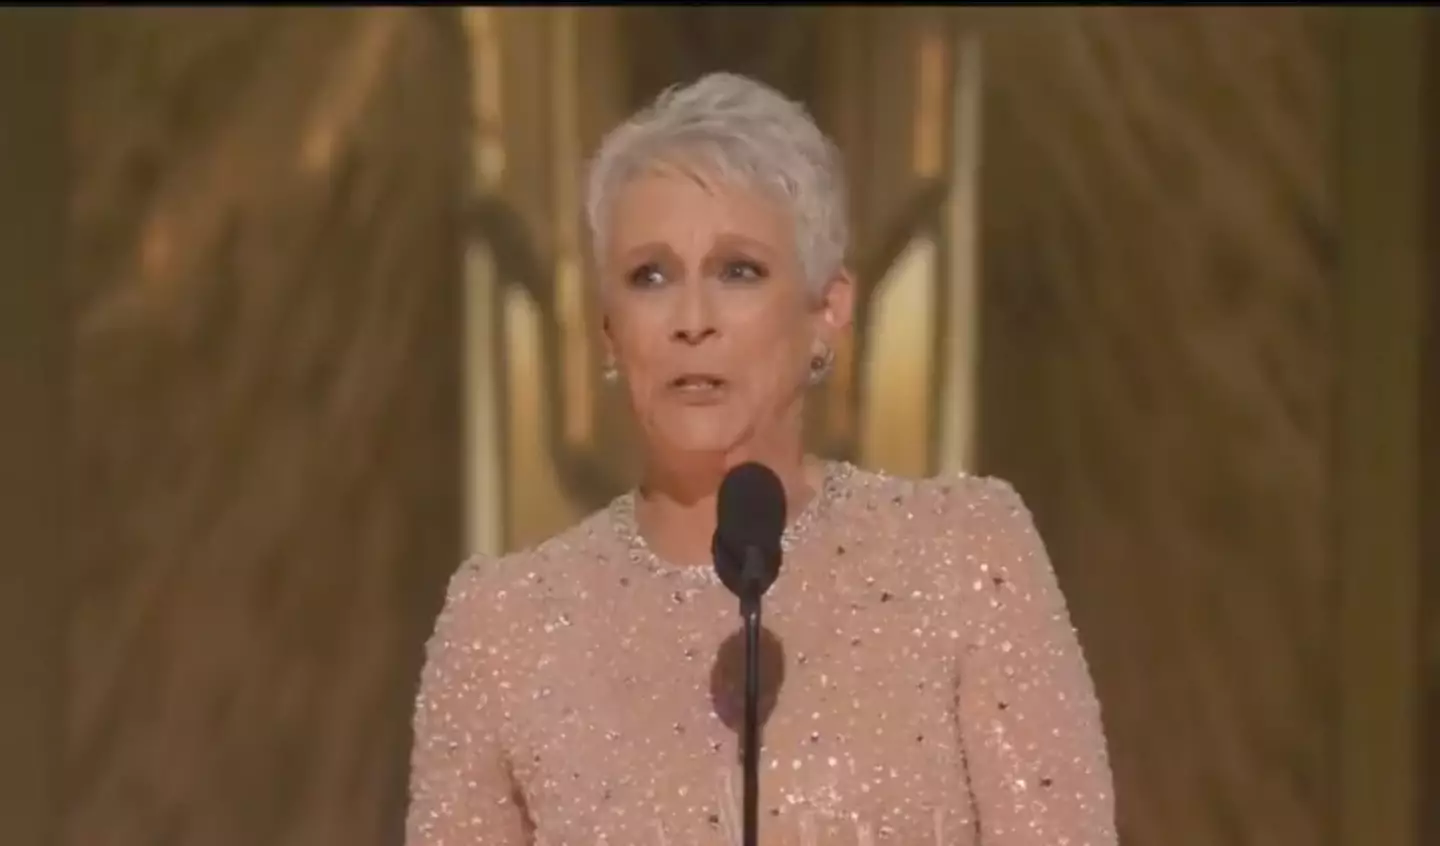 Jamie Lee Curtis shouted out her parents, who had both previously been nominated.